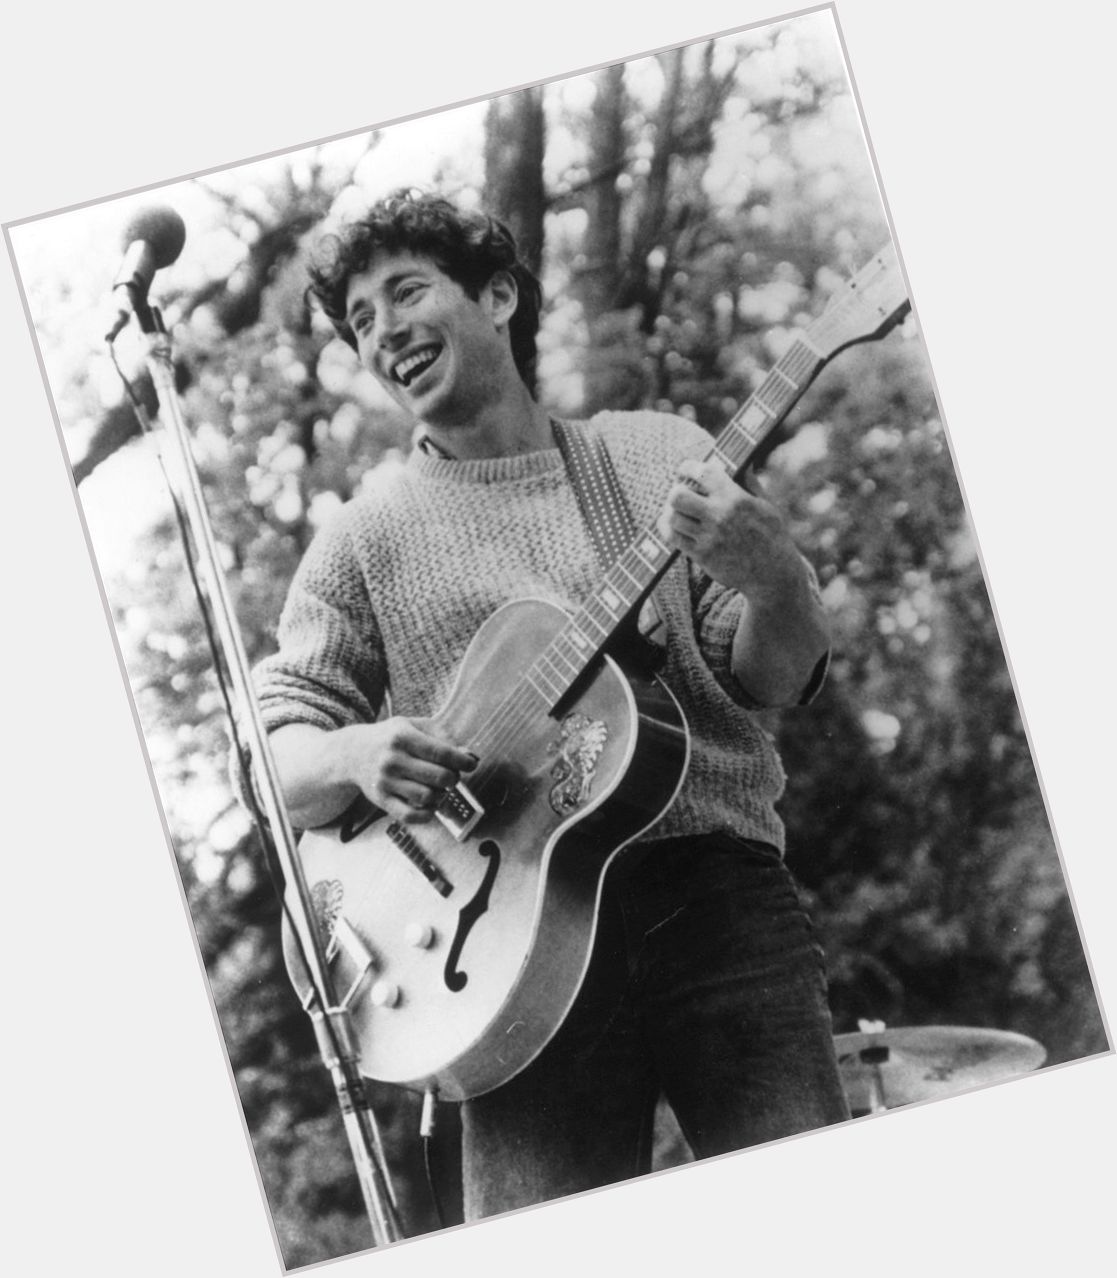 Happy birthday to Jonathan Richman of The Modern Lovers, born on this day in 1951. 